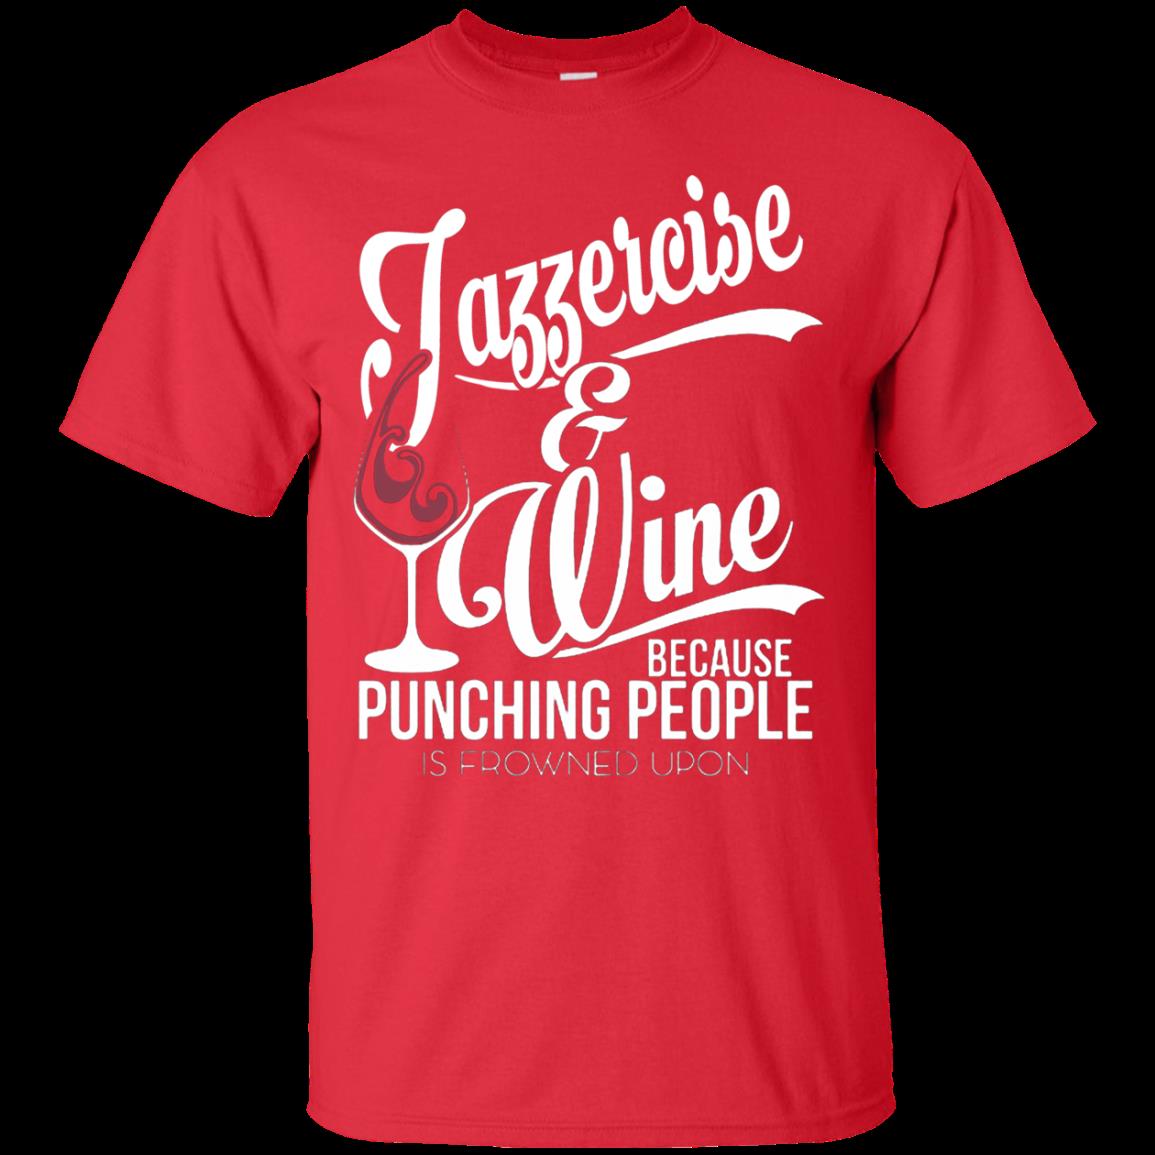 Jazzercise Wine Shirts Because Punching People Is Frowned Upon